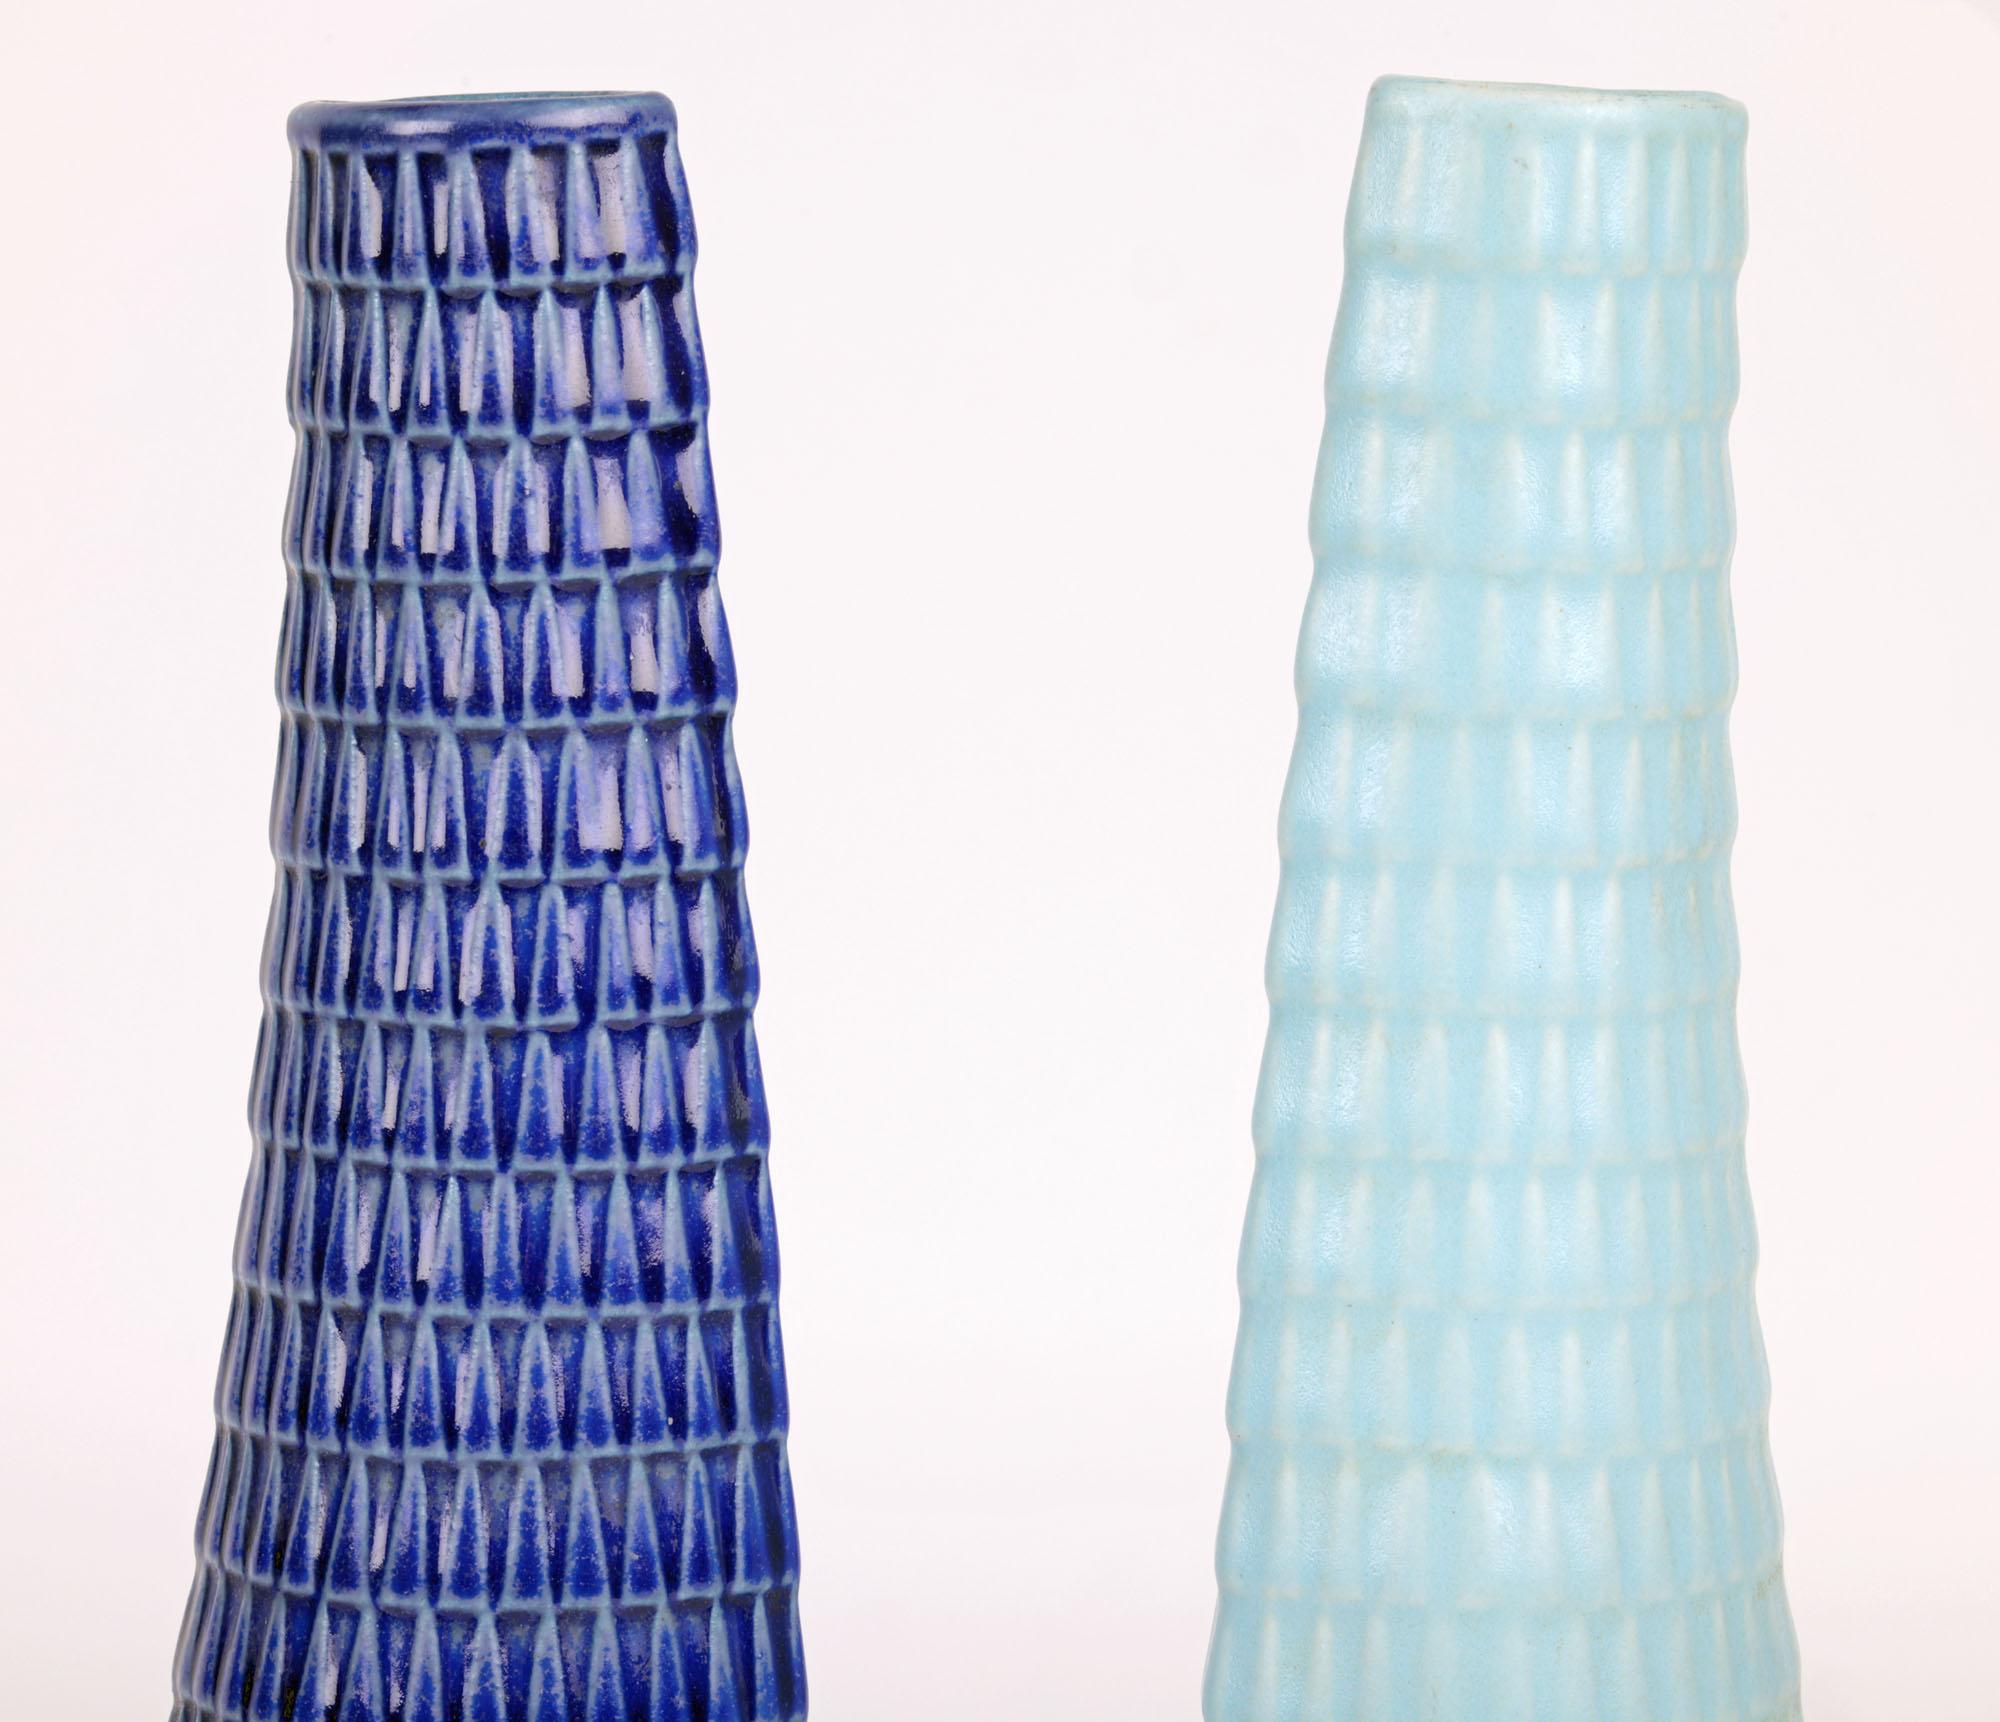 Stig Lindberg (Swedish, 1916-82) was one of the greatest Scandinavian designers of the Twentieth Century.  He was prolific in ceramics designing everything from tableware ranges to unique stoneware pieces. He also designed in other mediums like